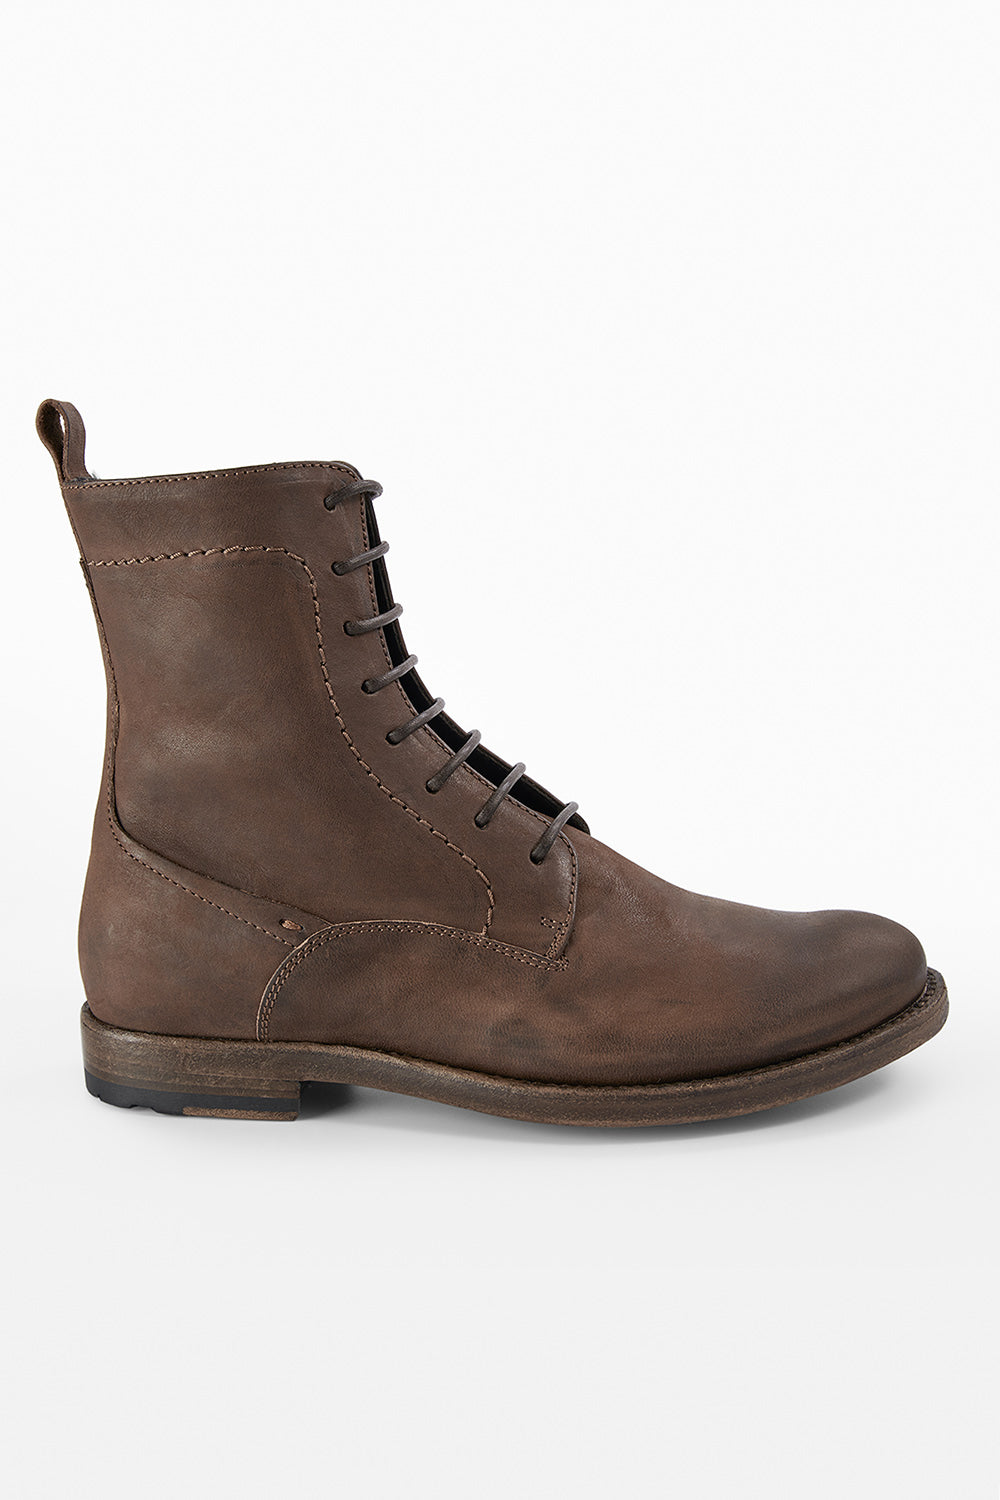 Women BOOTS Combat SLOANE Brown Horse-Leather UNTAMED STREET